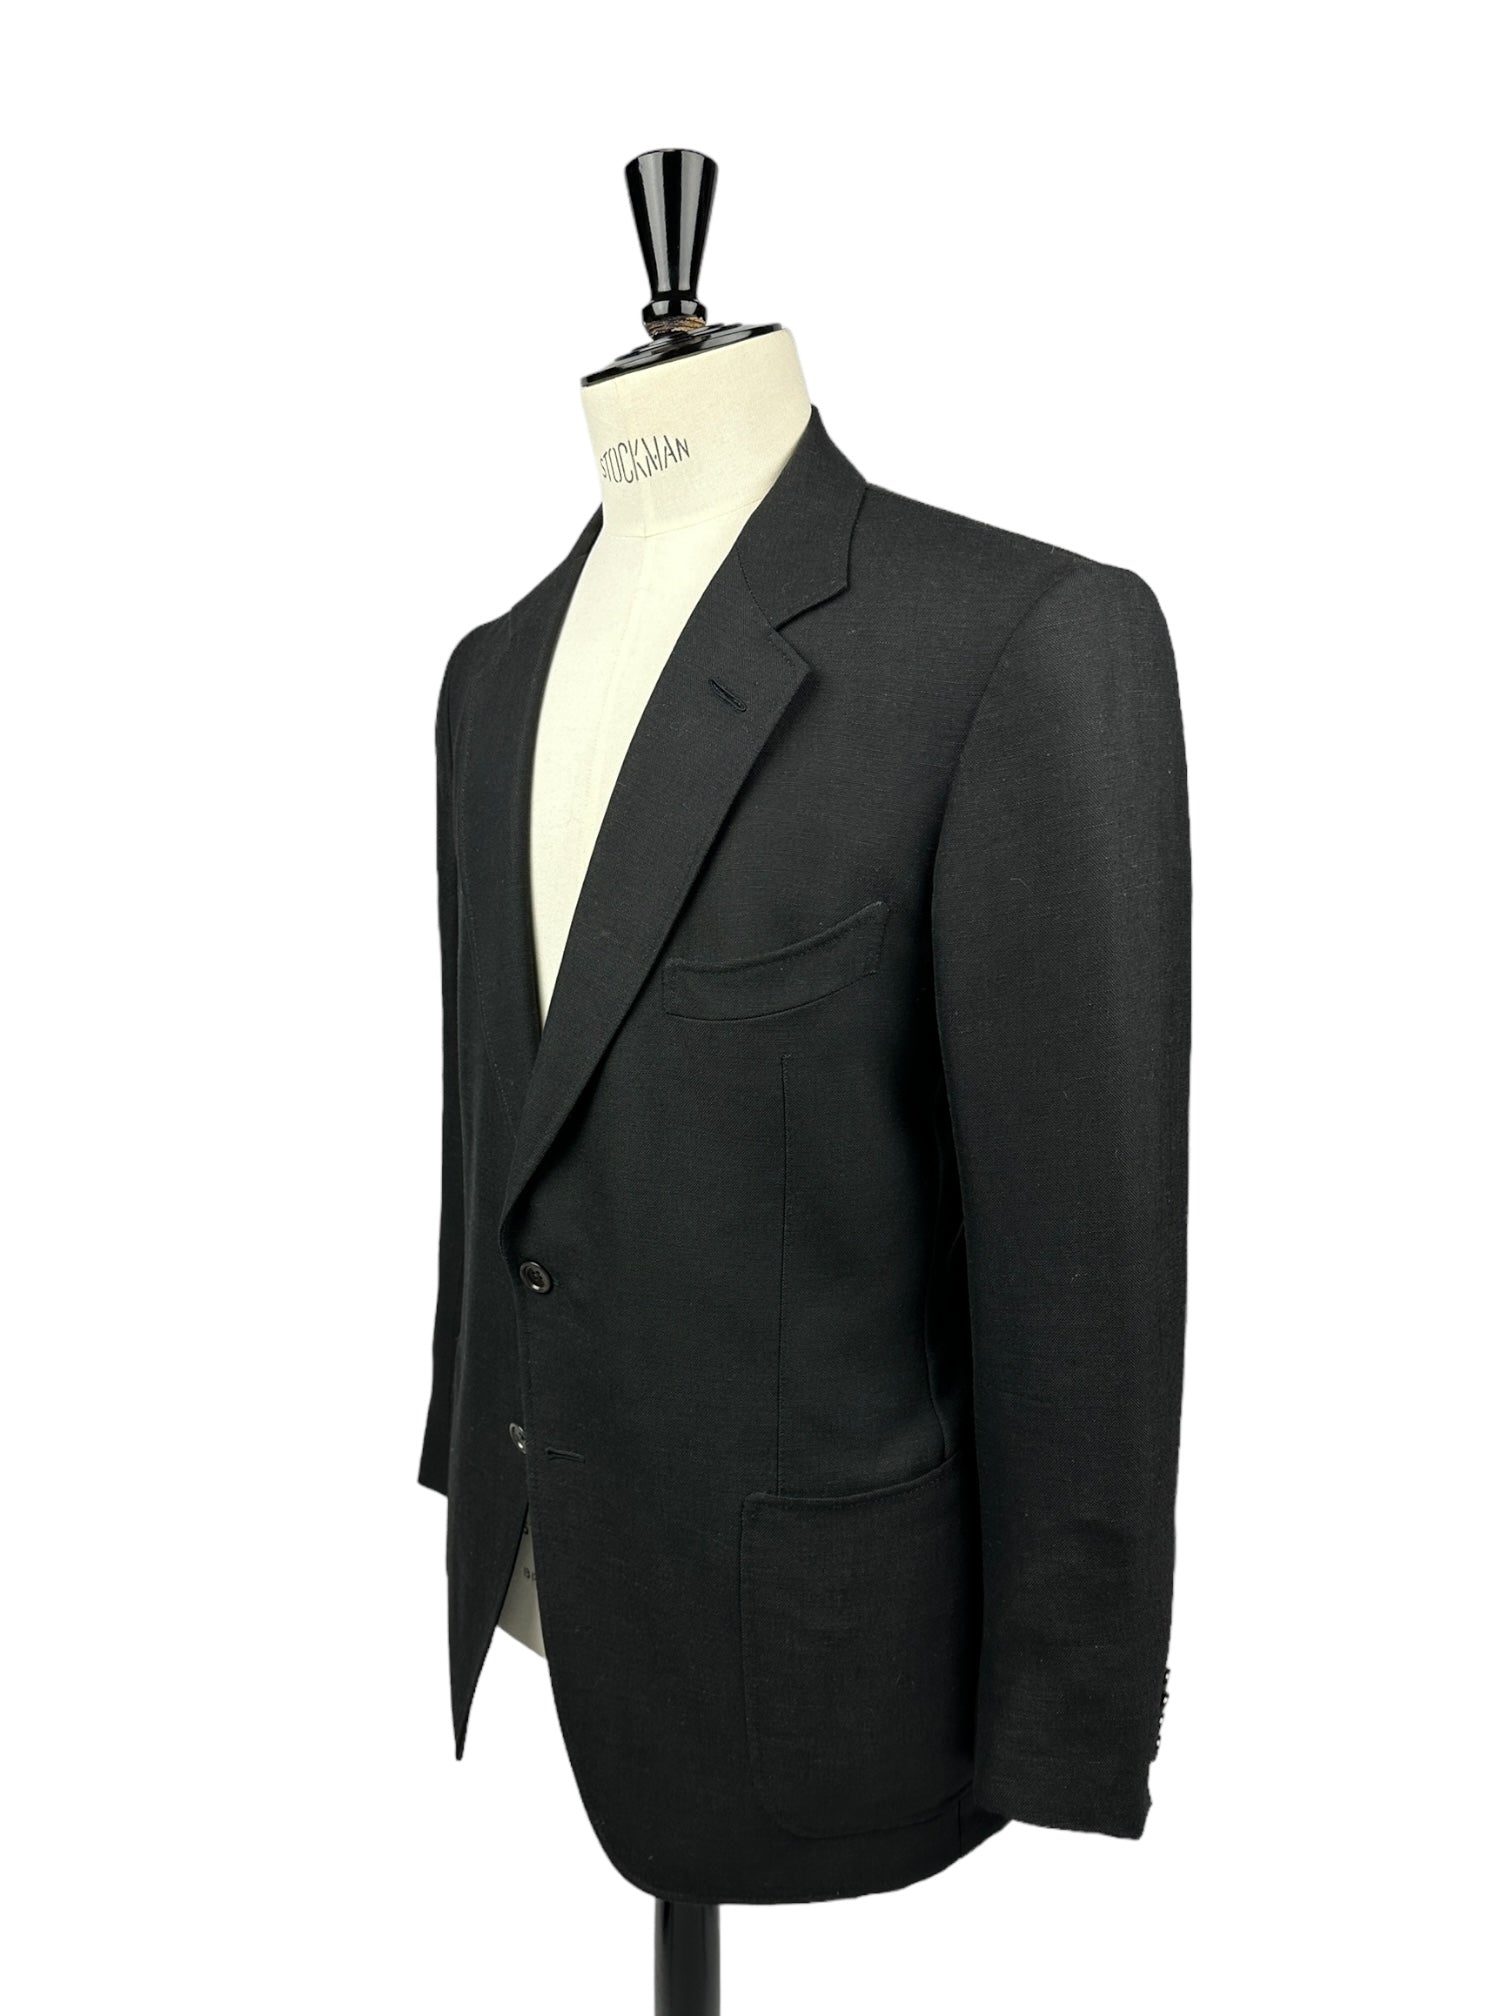 Tom Ford Black Micro-Structure Jacket